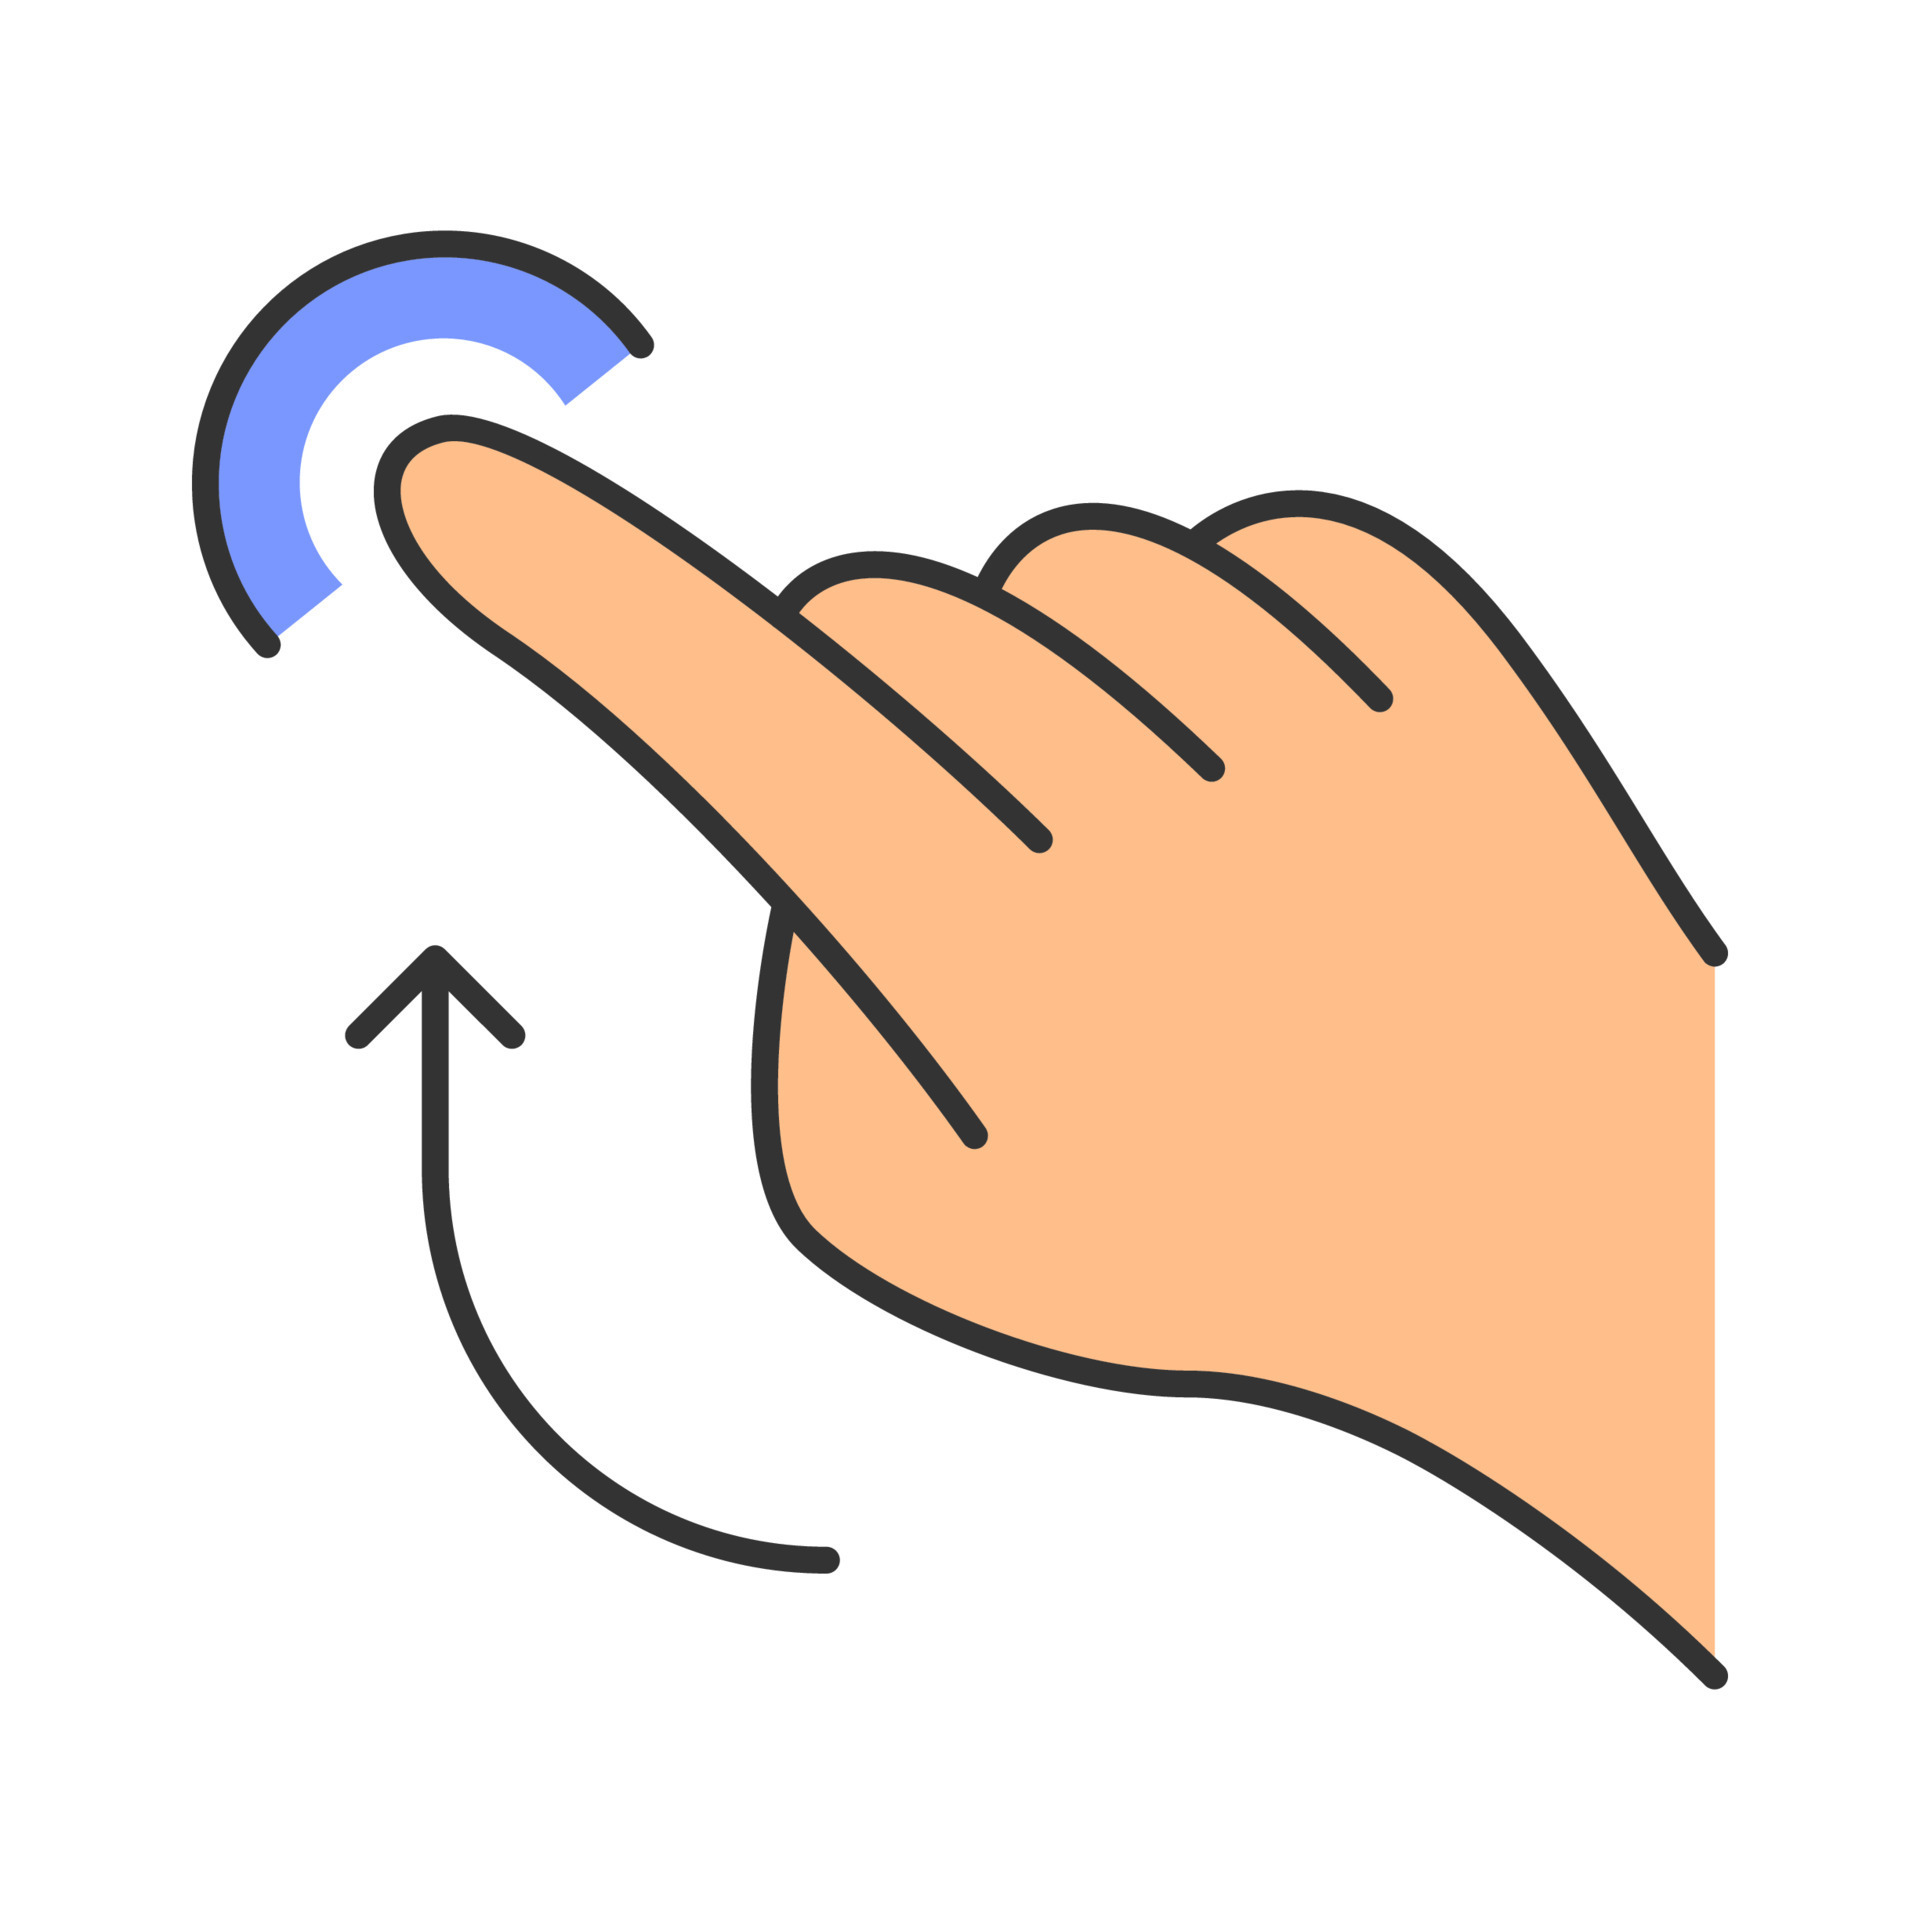 Flick up gesture color icon. Touchscreen gesturing. Human hand and